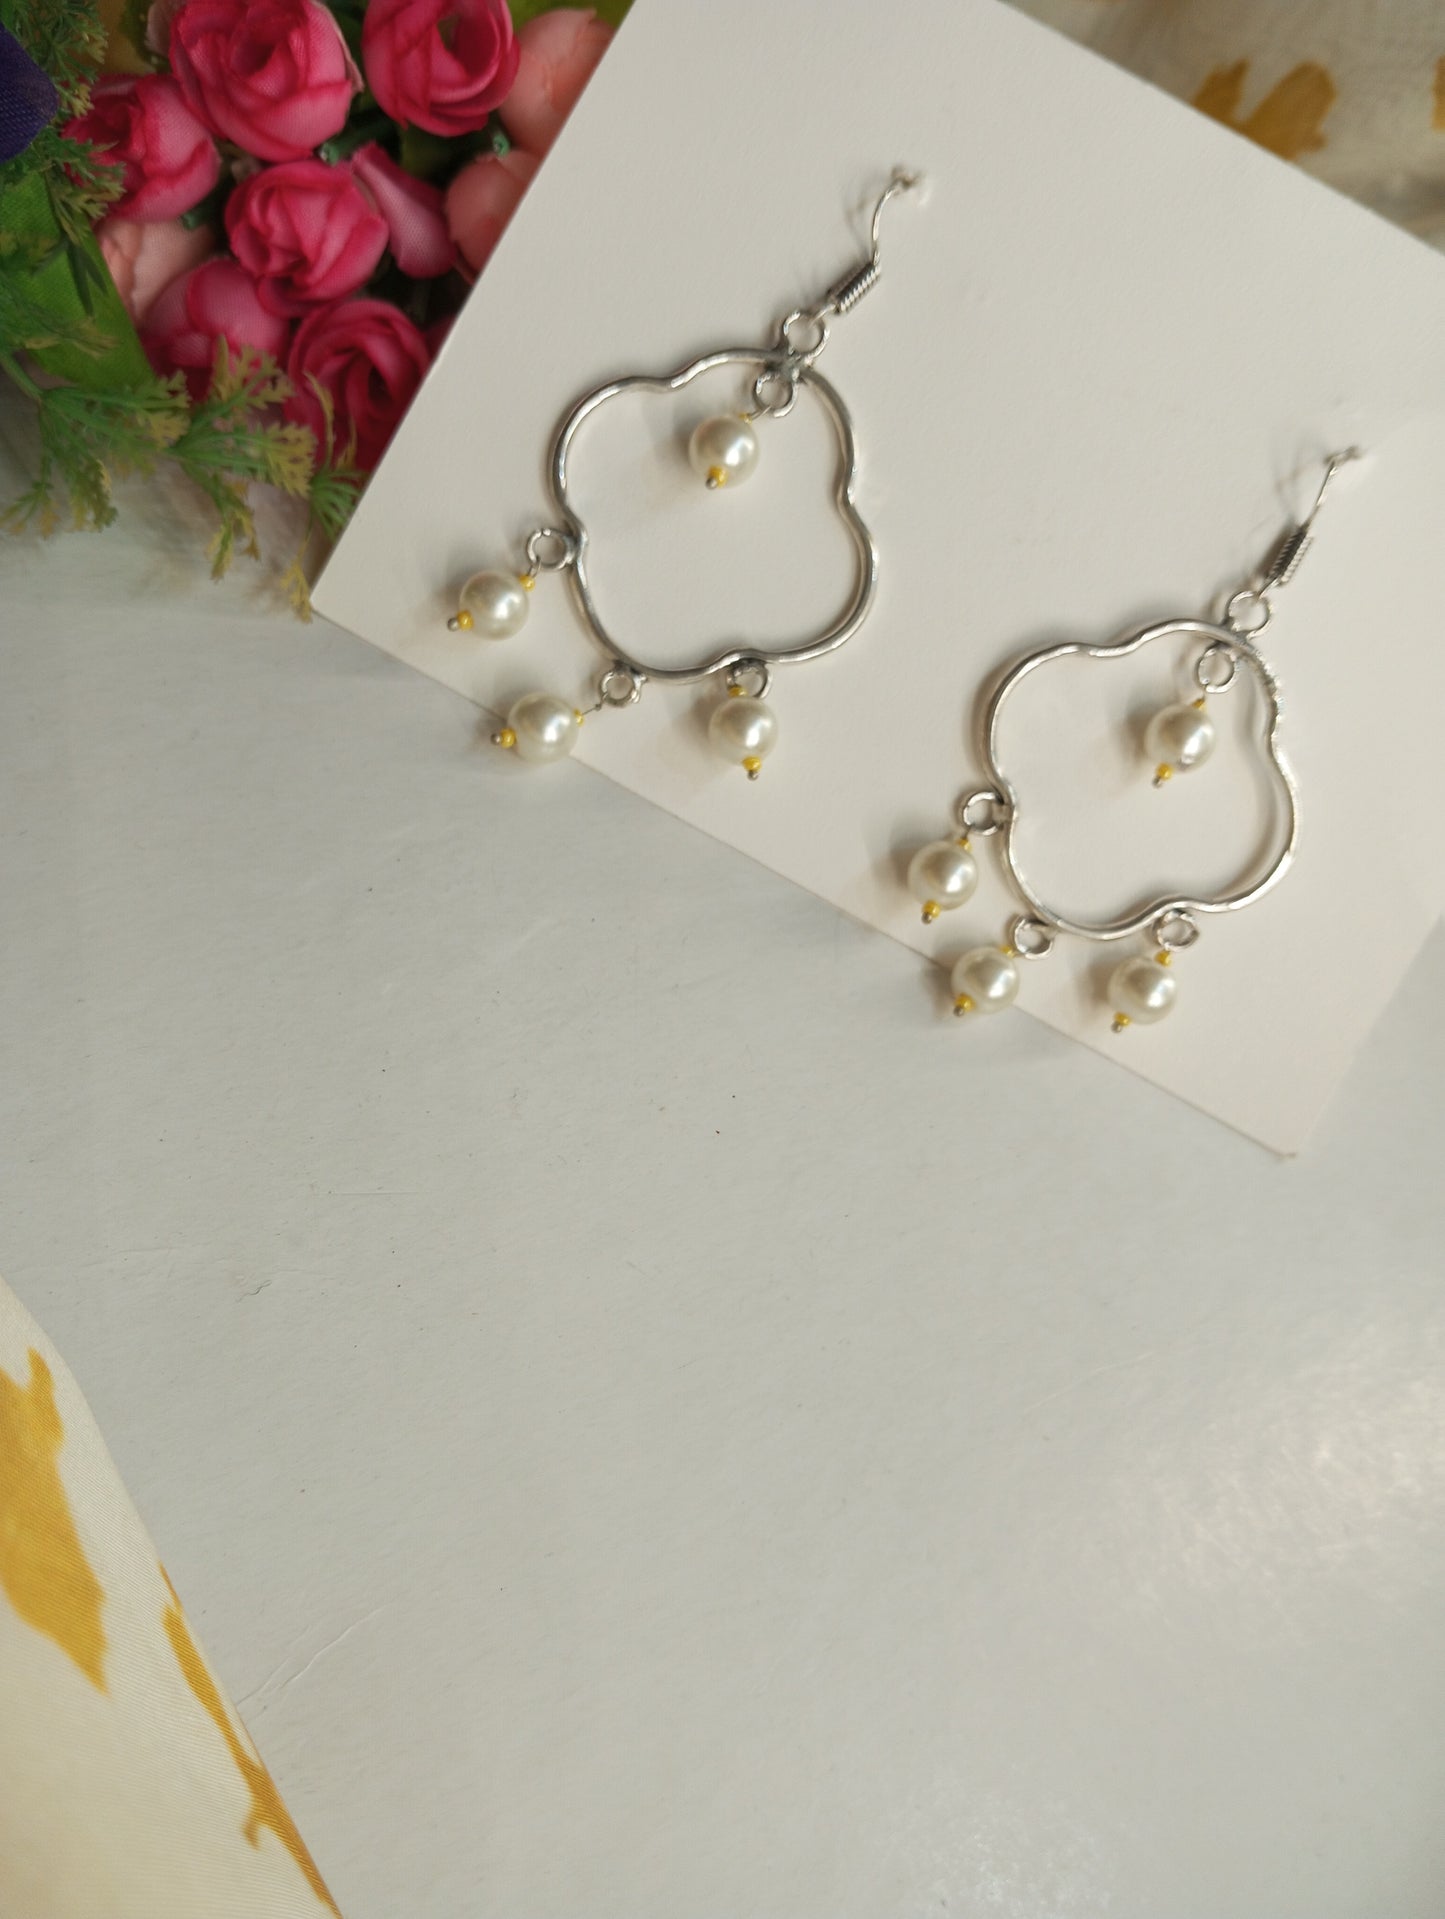 Silver Color Earrings with Hanging Pearls